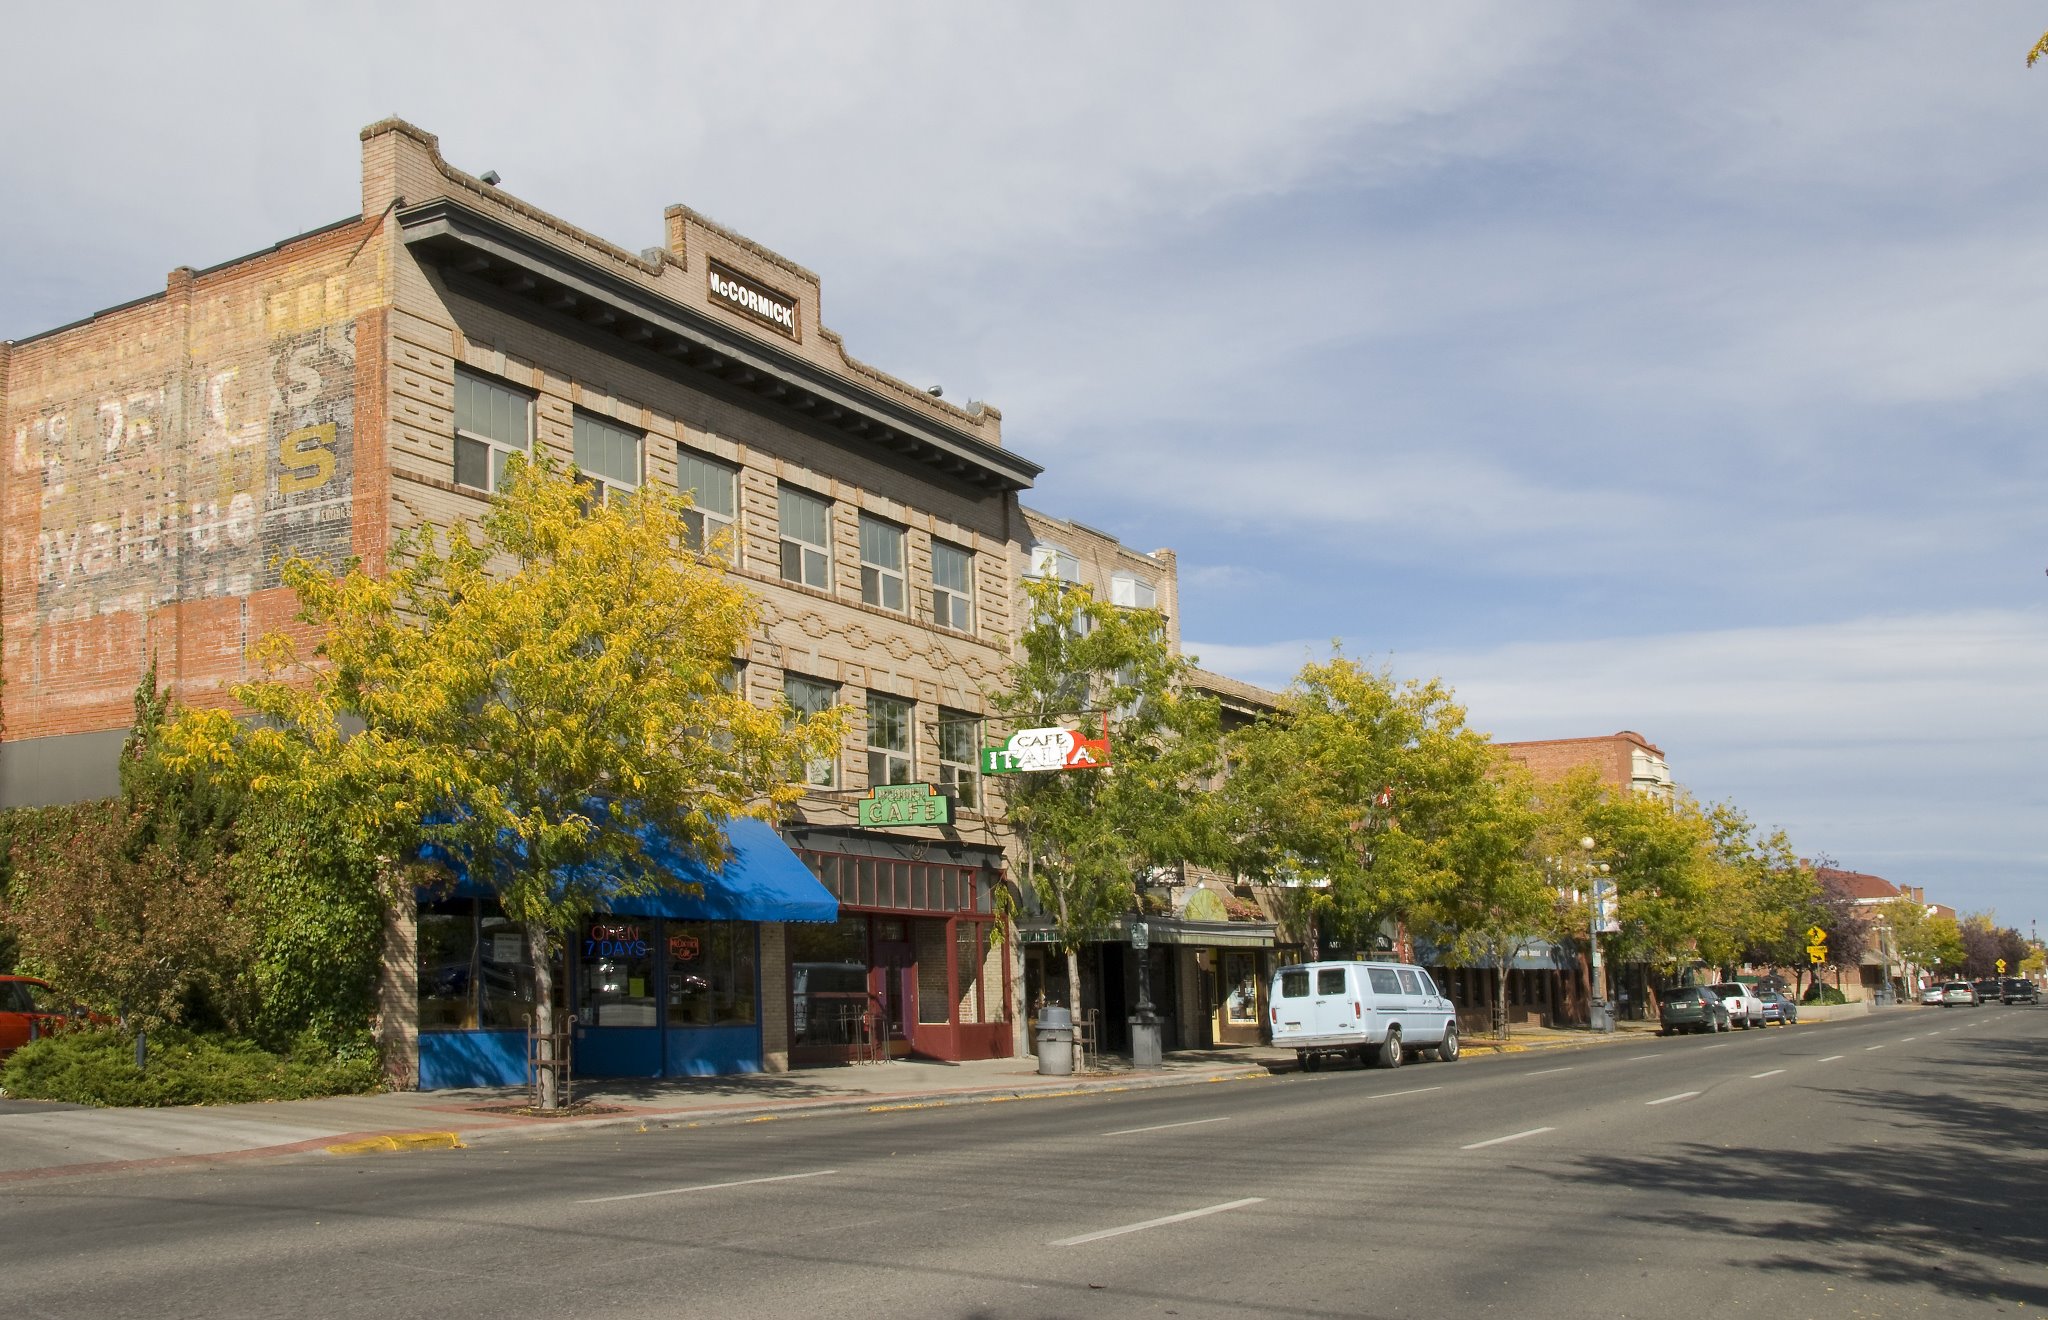 This Collection Of Shops In Montana Offers The Perfect Way To Spend An Afternoon